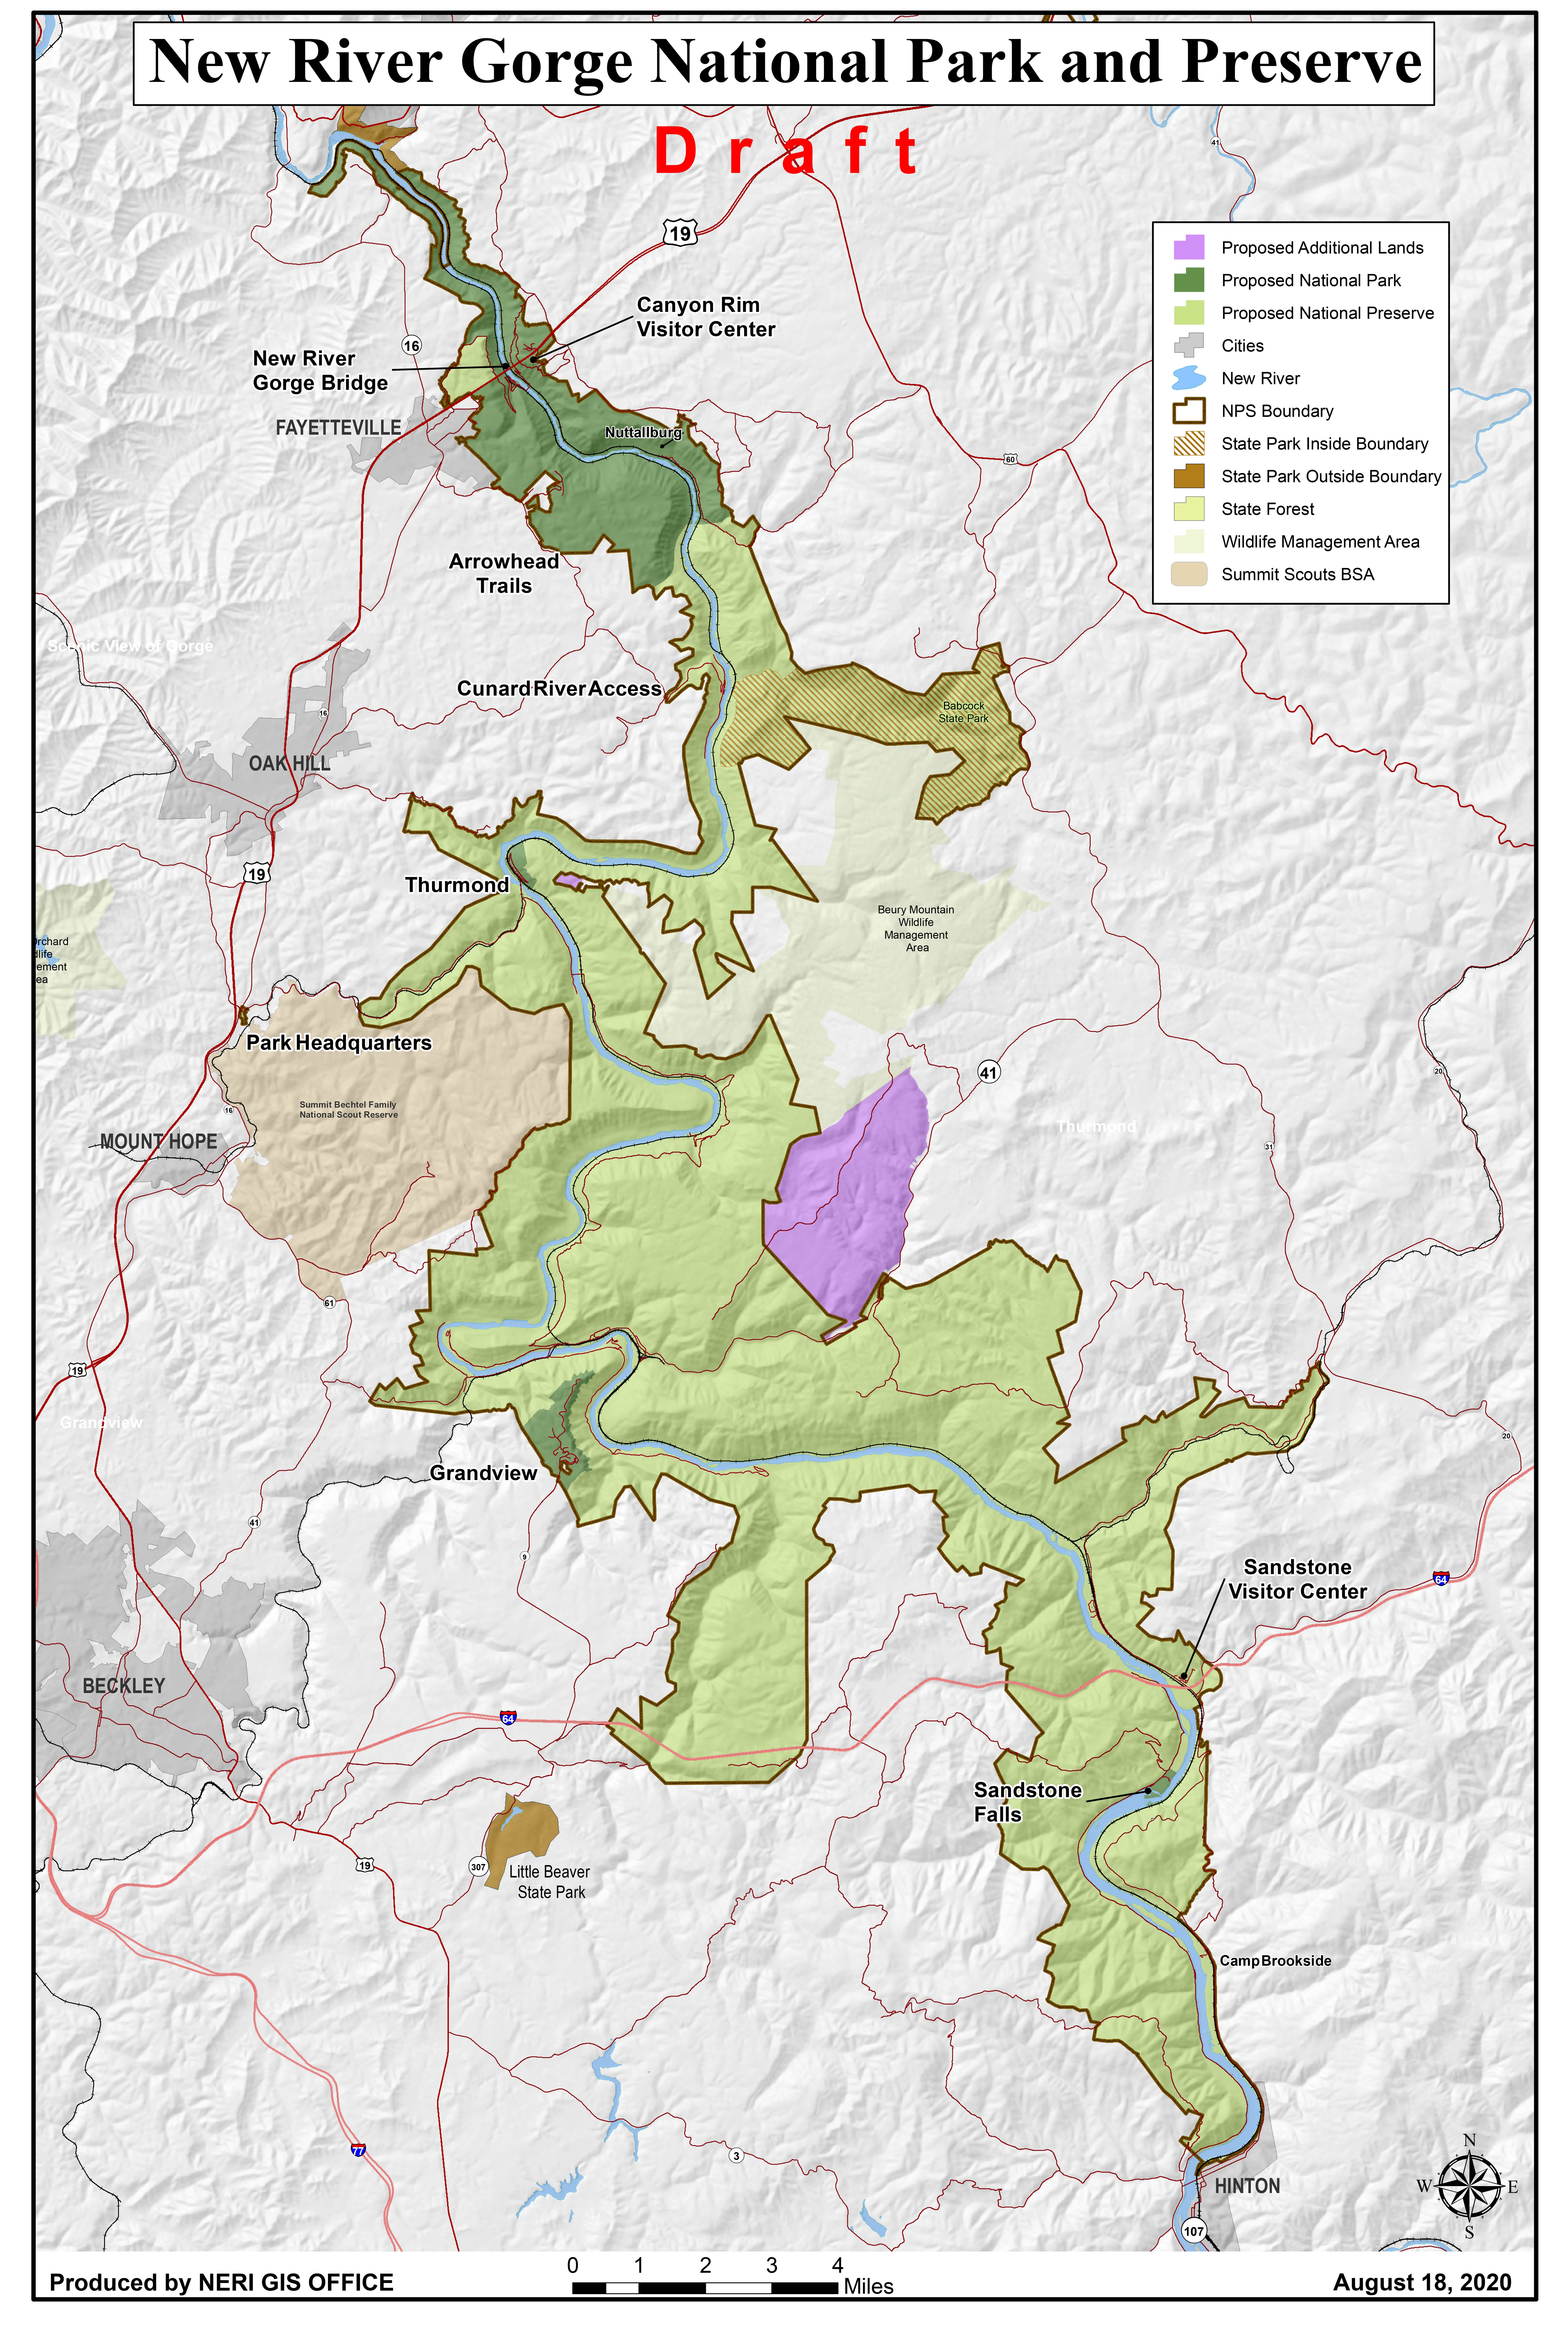 The national park and national preserve boundary map for New River Gorge in West Virginia.